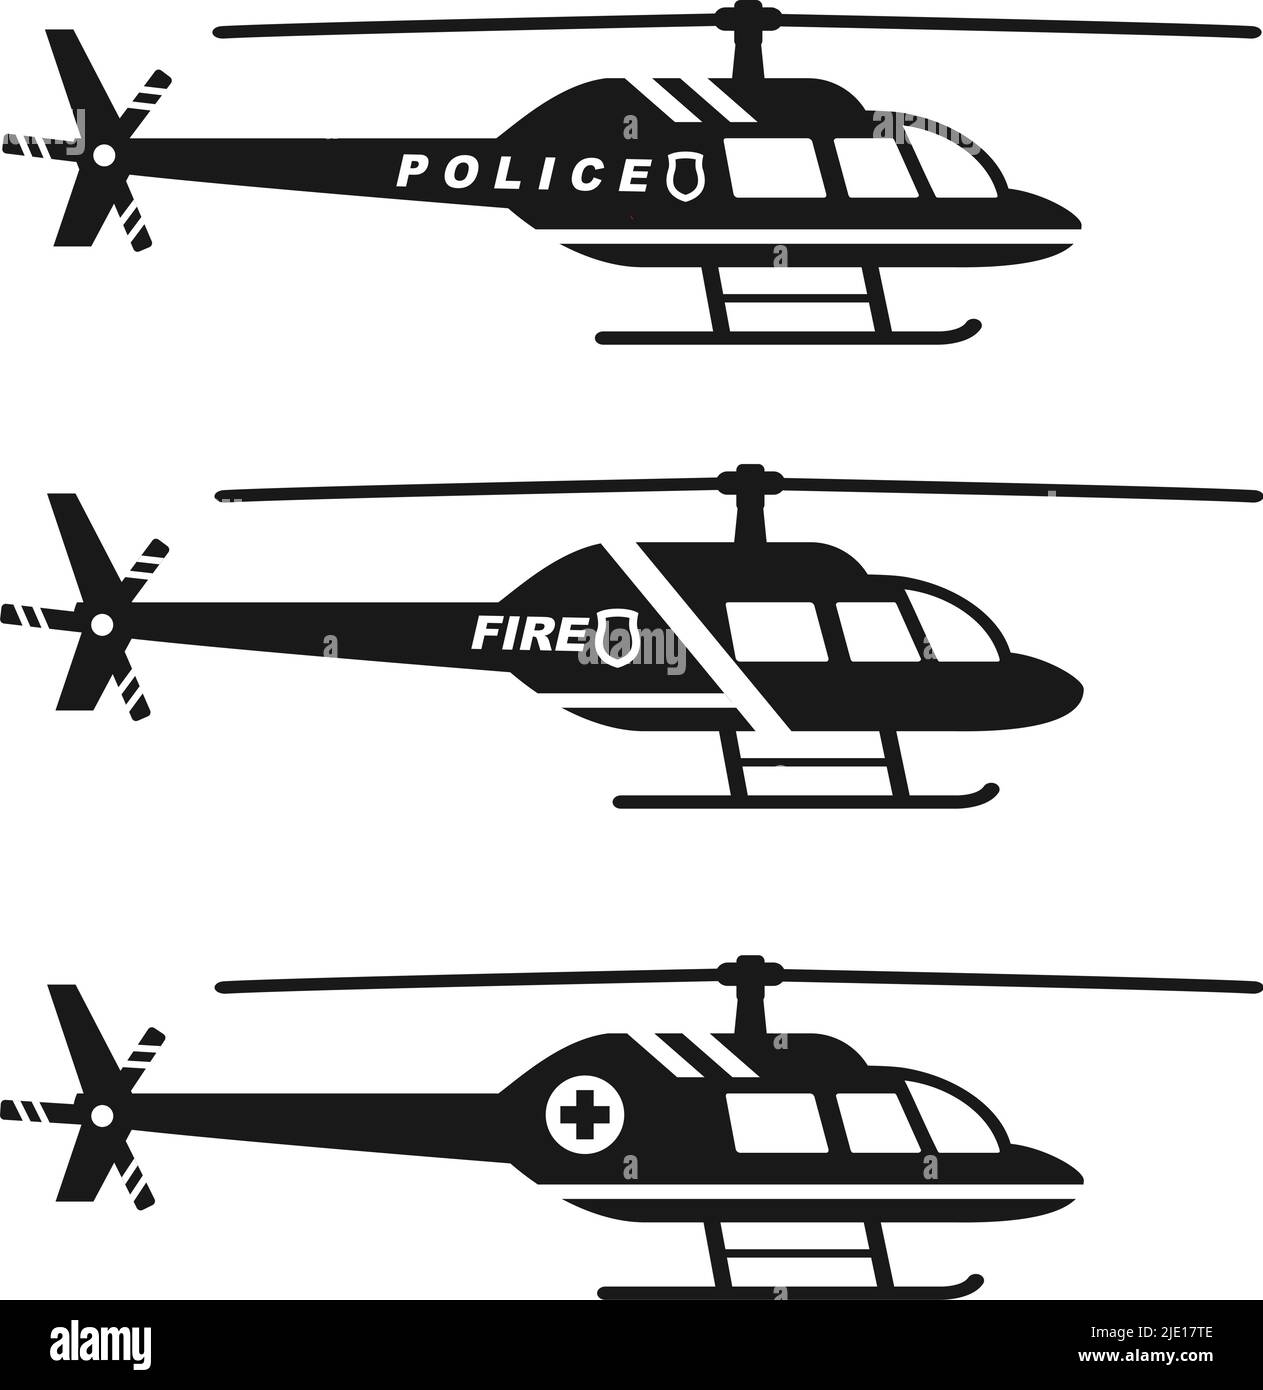 Silhouette illustration of medical, police and fire helicopters on white background. Stock Vector